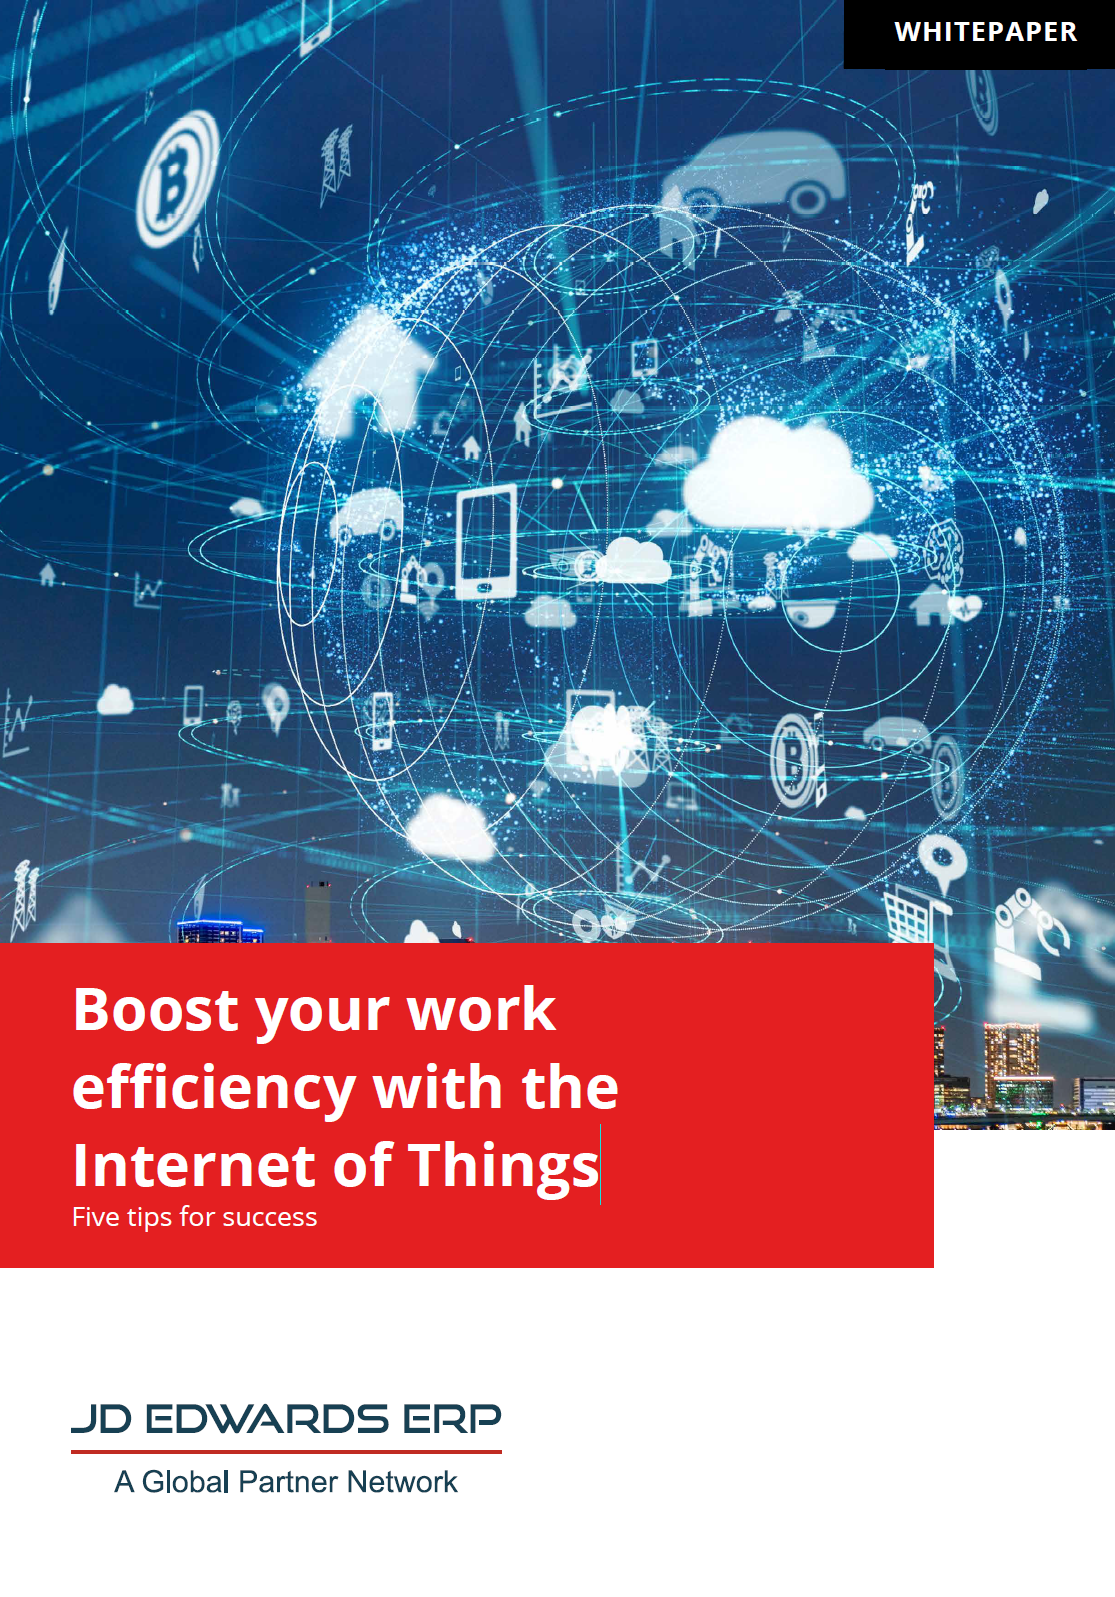 Whitepaper: Increase your work efficiency with the Internet of Things